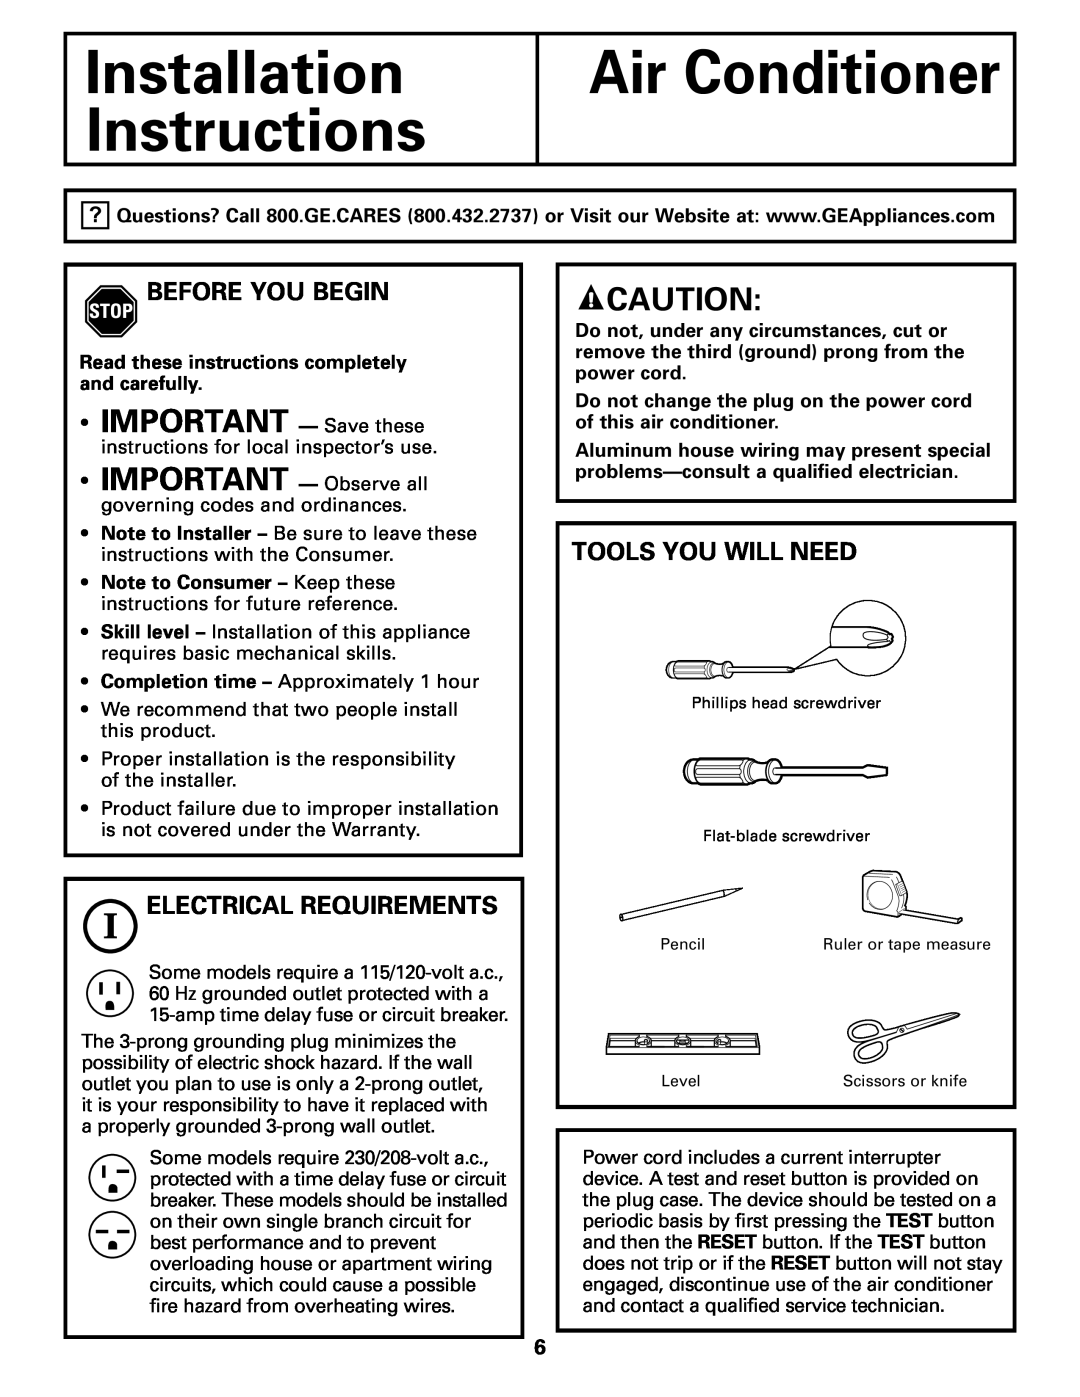 GE AER05 Installation Instructions, Air Conditioner, IMPORTANT - Save these, Before You Begin, Electrical Requirements 